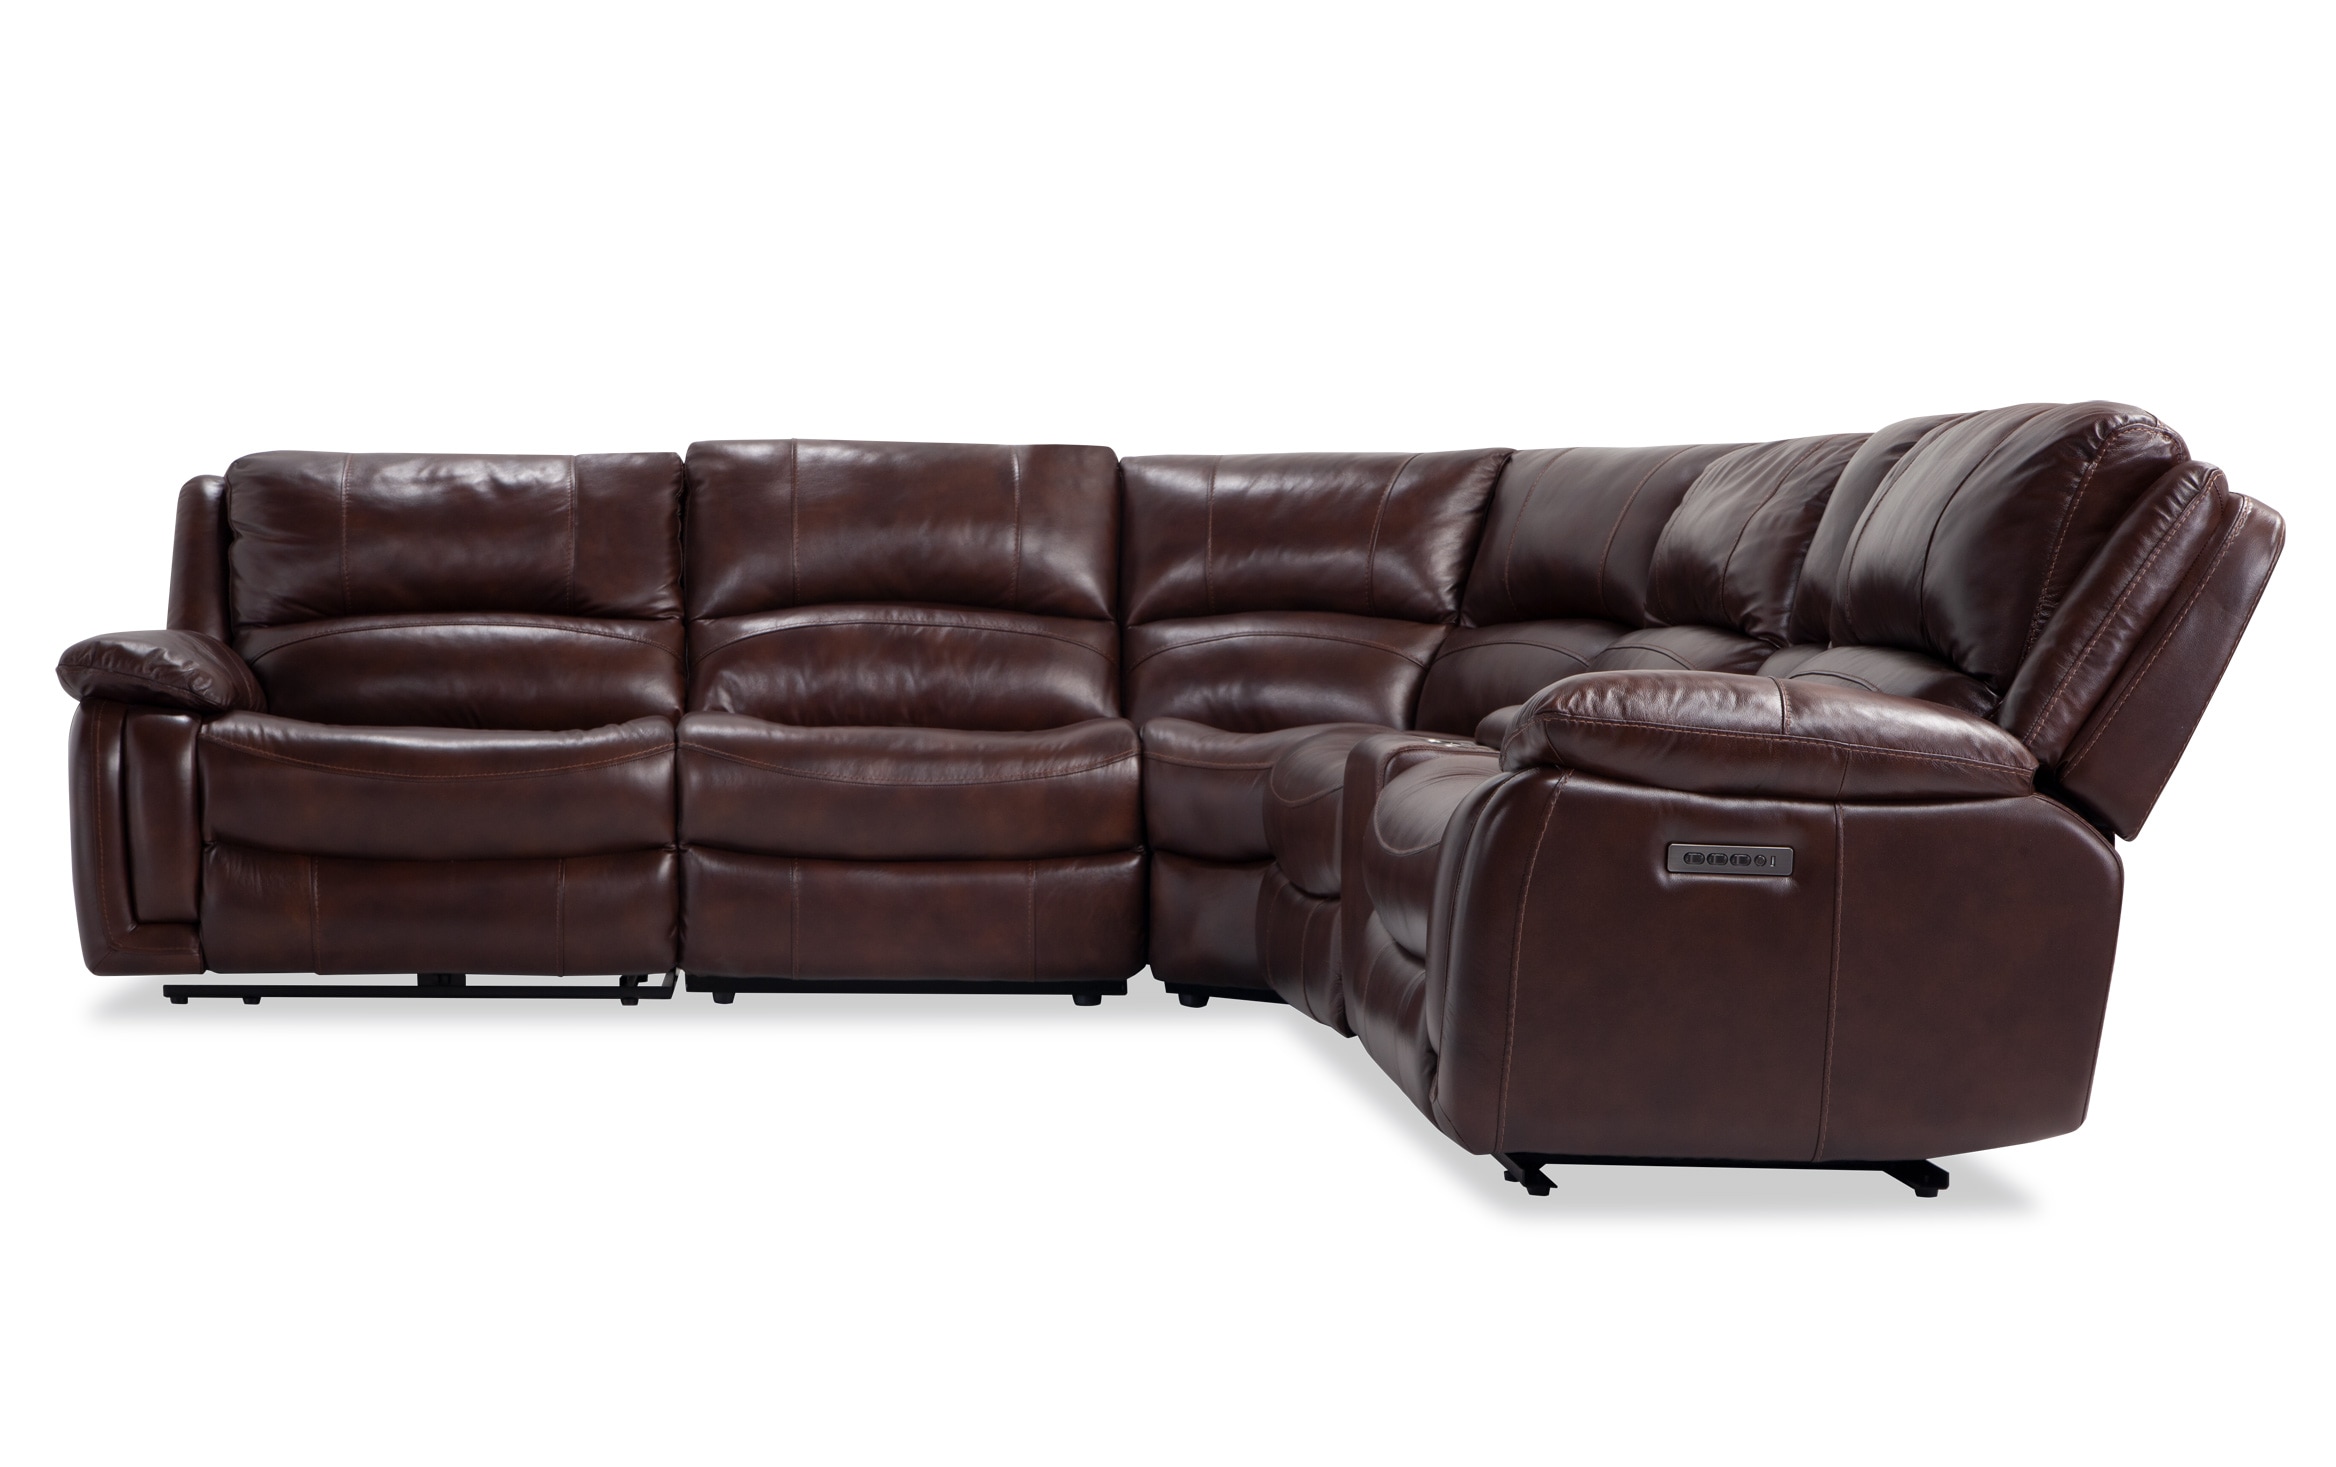 6 Piece Power Reclining Sectional, Brown Leather Sectional Couch With Recliners